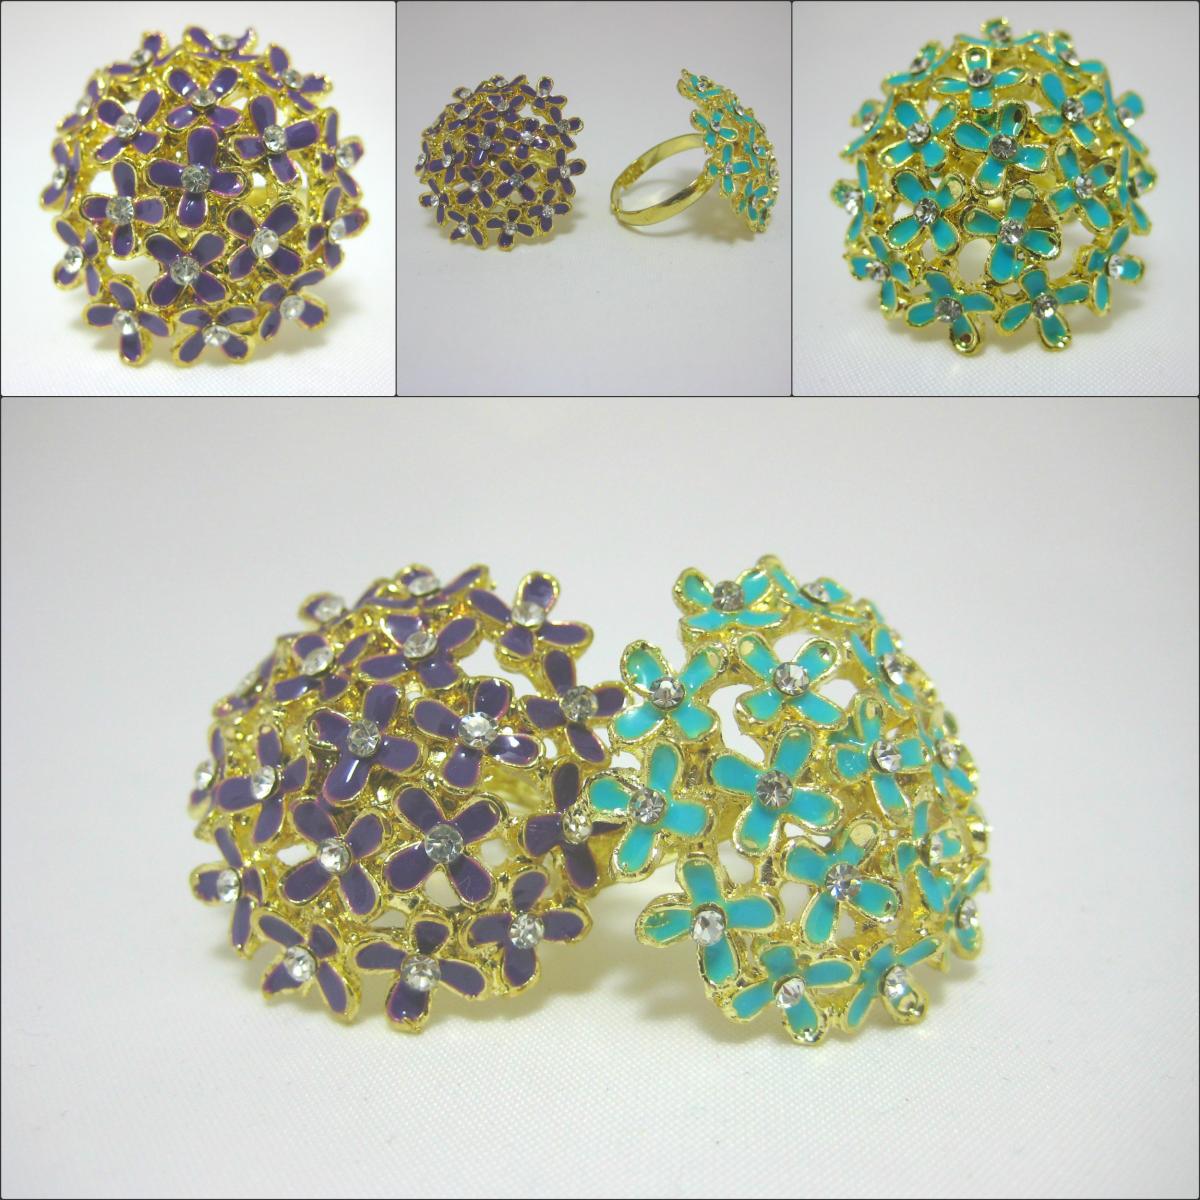 Enamel And Rhinestone Large Allium Flower Gold Rings In A Range Of Colours